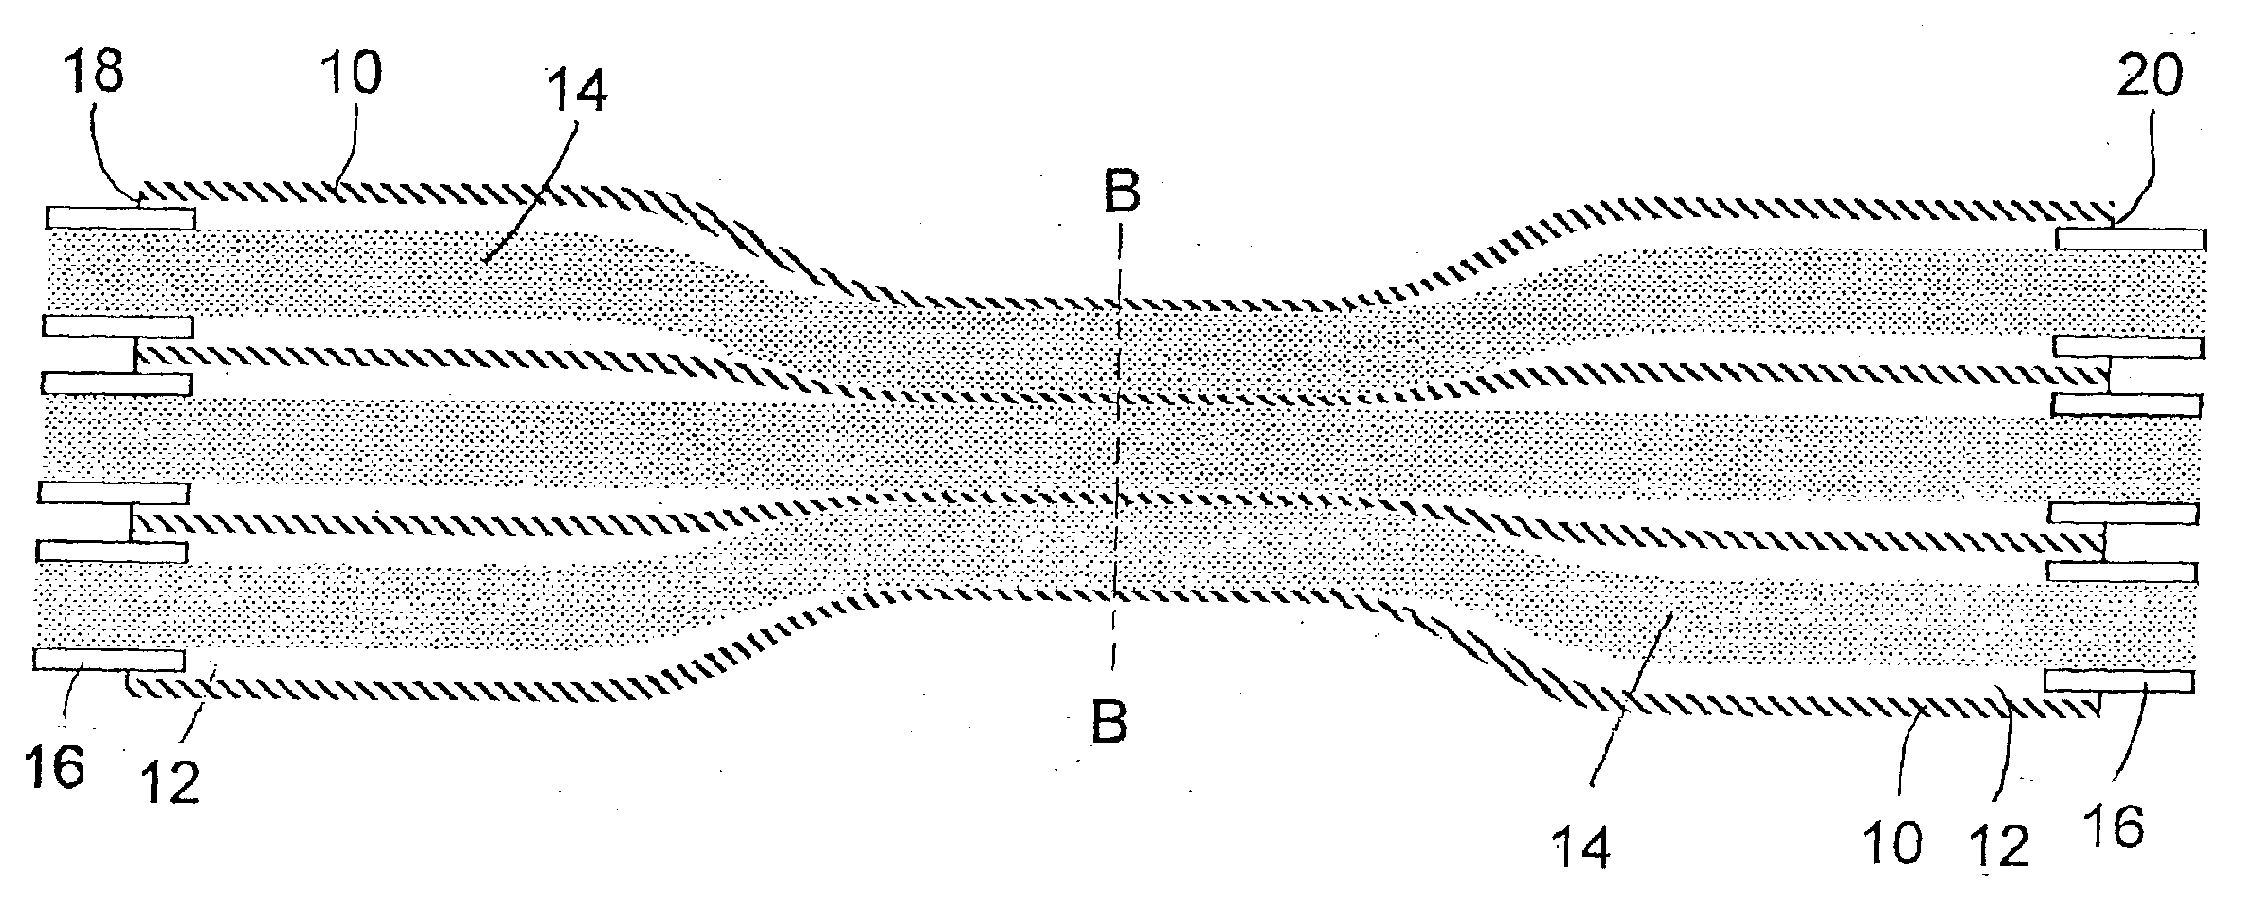 Method of Making Fiber Optic Couplers with Precise Postioning of Fibers